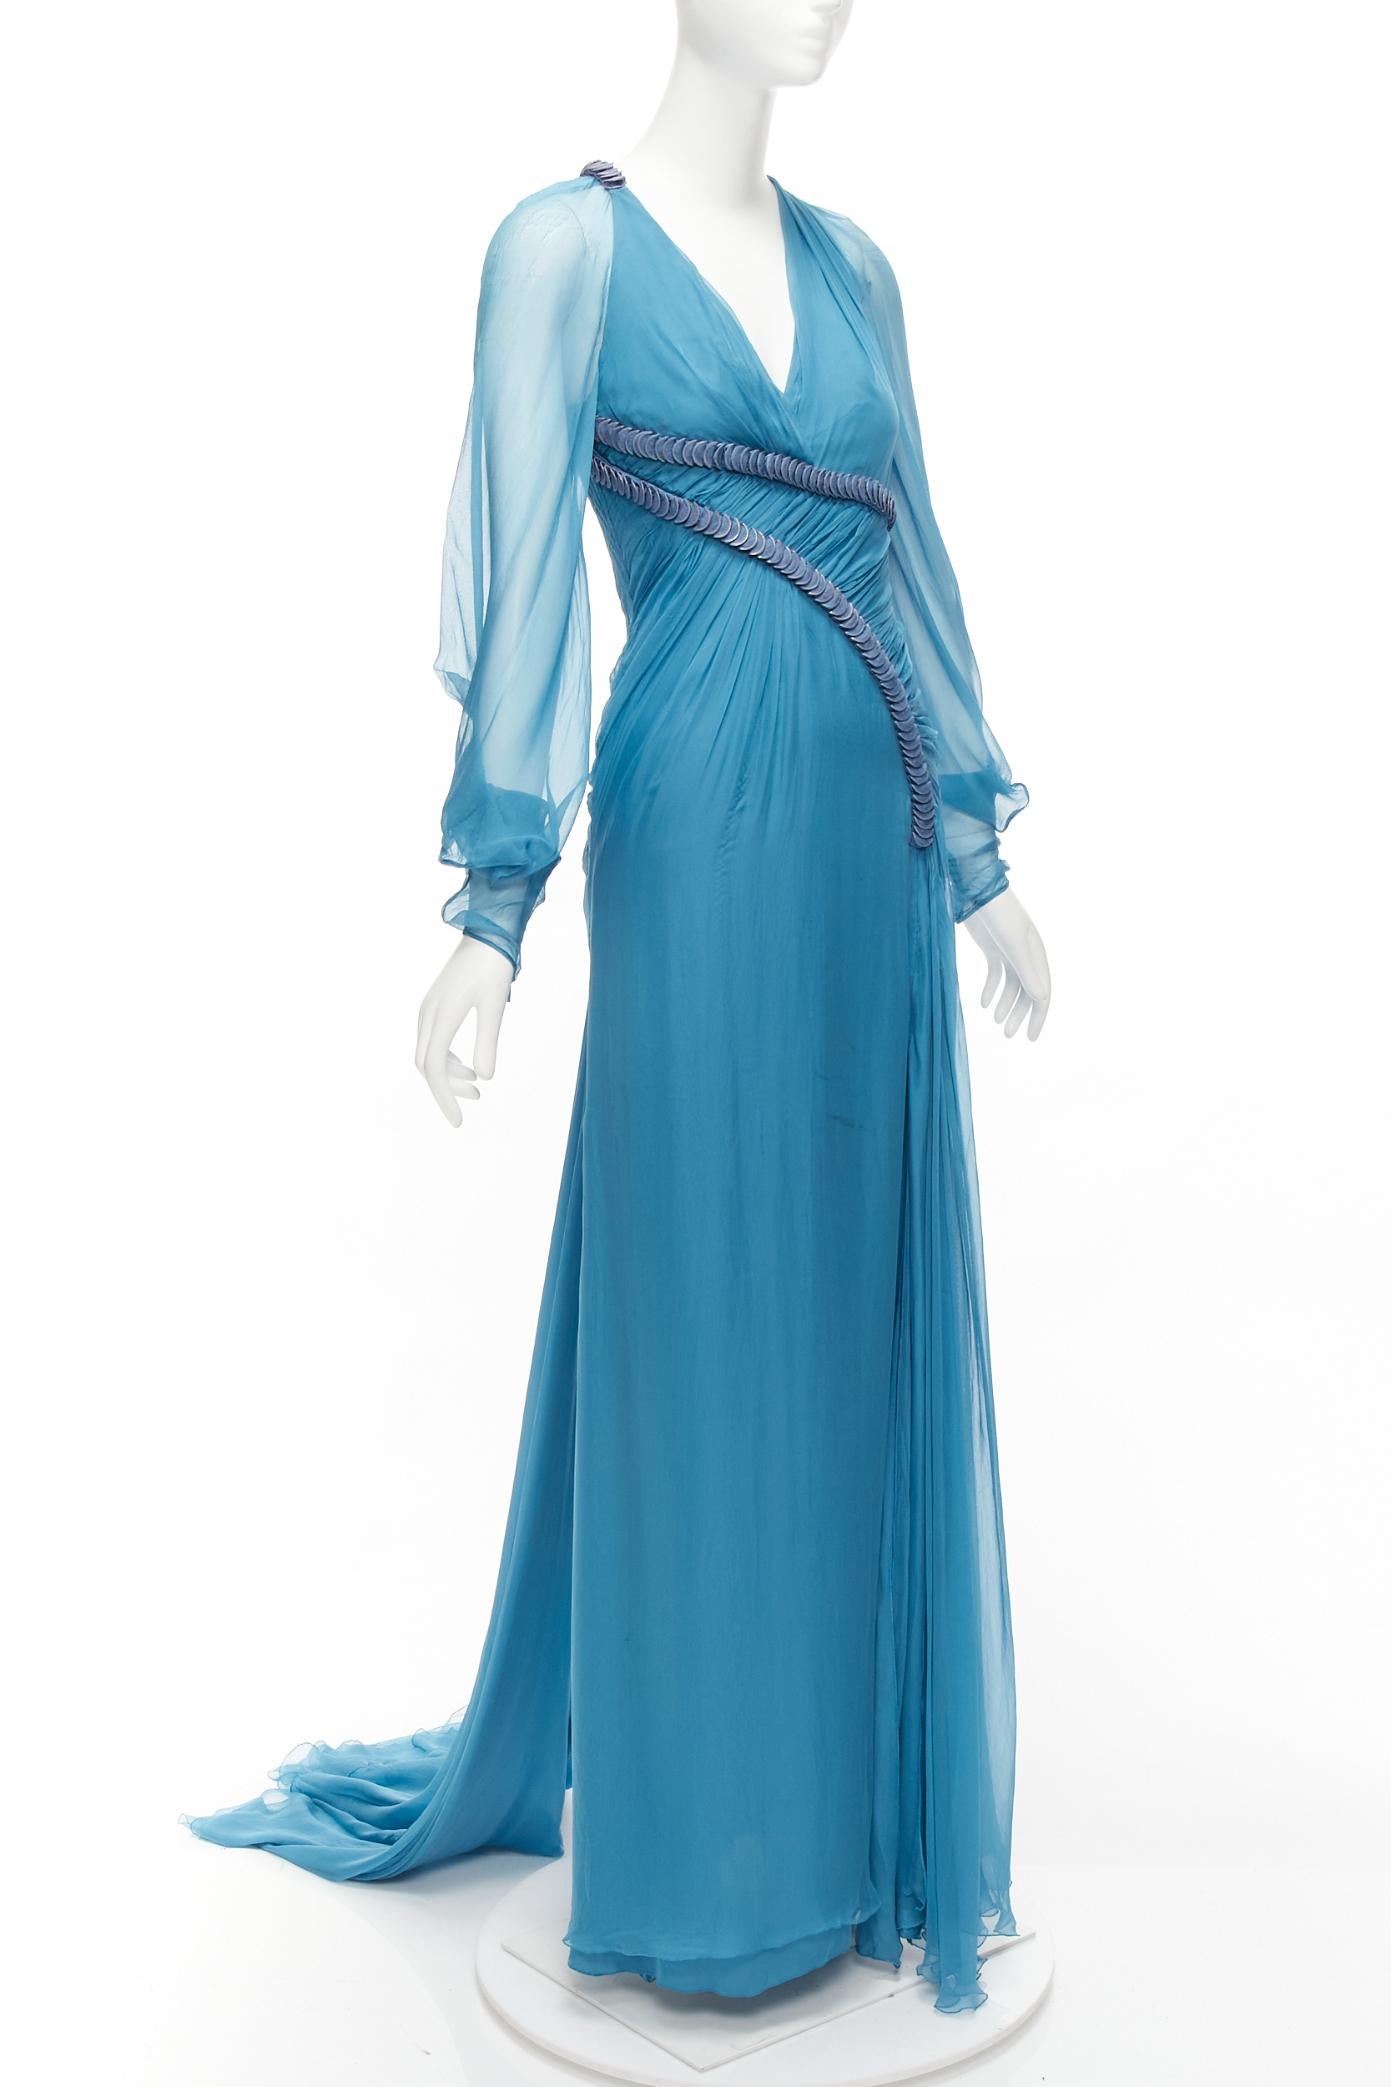 rare VERSACE Runway blue silk pailette embellished sheer sleeves draped evening gown
Reference: TGAS/D01130
Brand: Versace
Designer: Donatella Versace
Material: Silk
Color: Blue
Pattern: Solid
Closure: Zip
Lining: Nude Mesh
Extra Details: Mesh